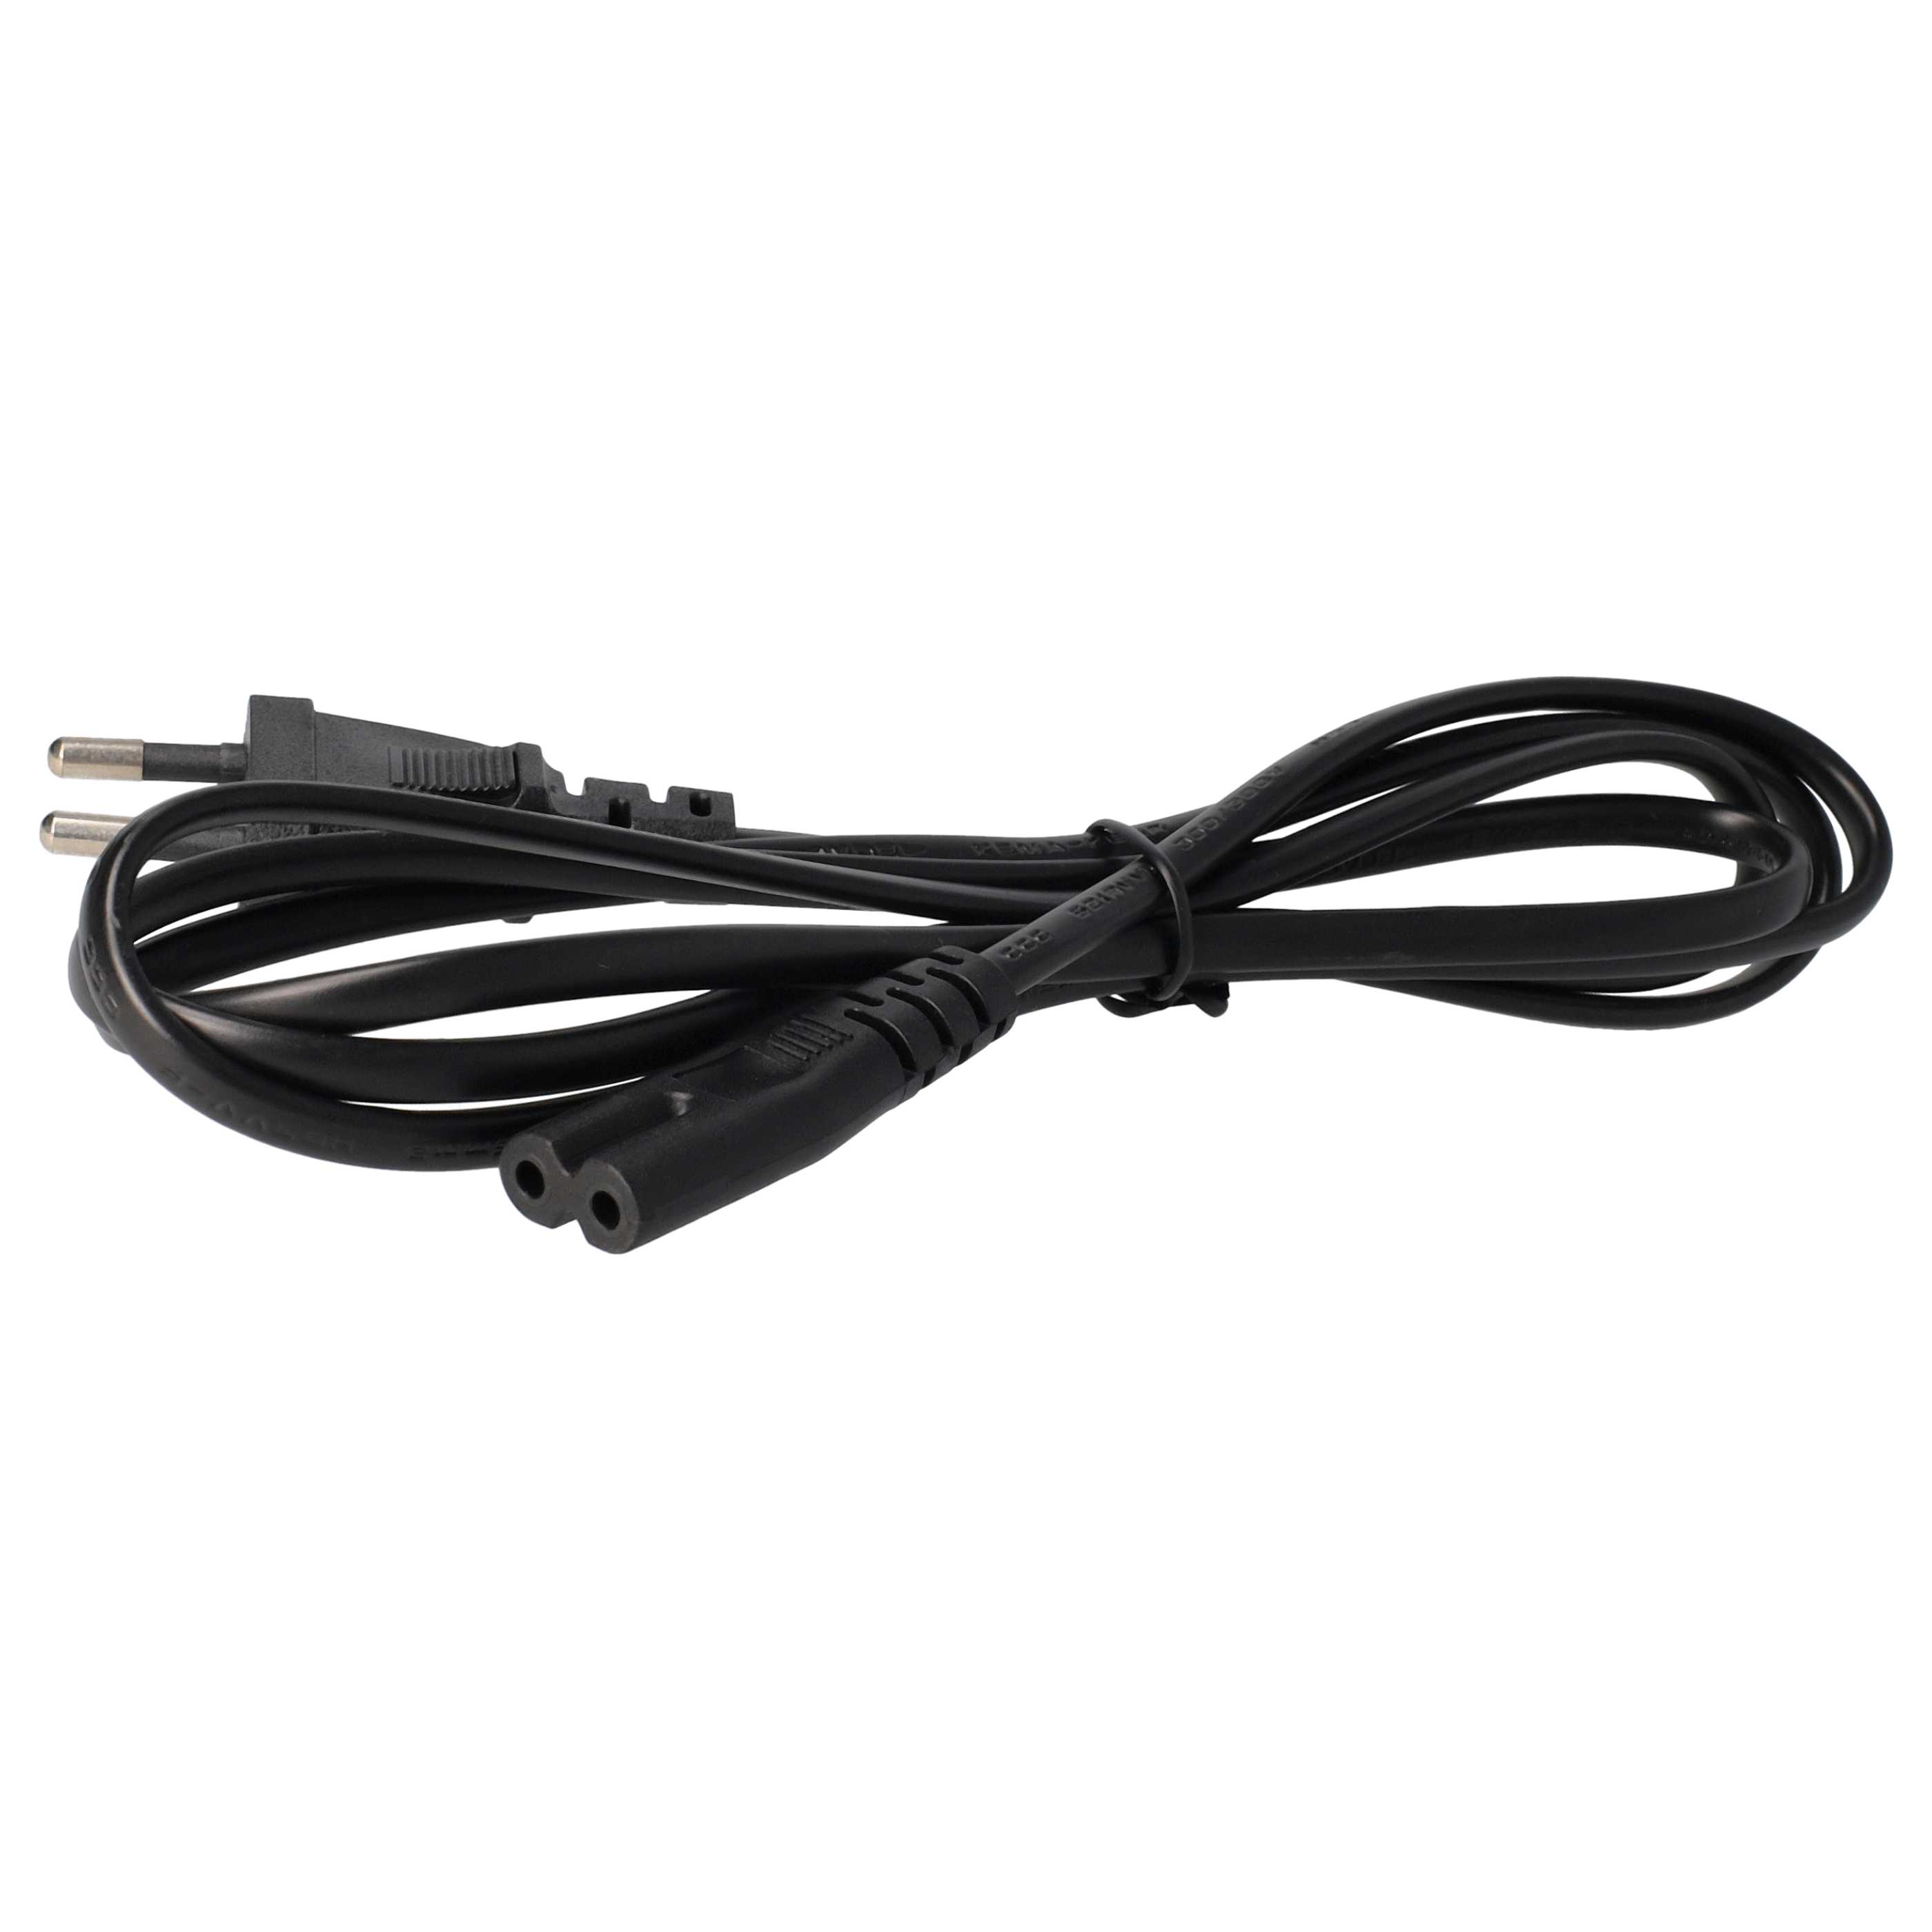 Mains Power Adapter replaces Sony PCGA-ACX1 for SonyNotebook, 42 W